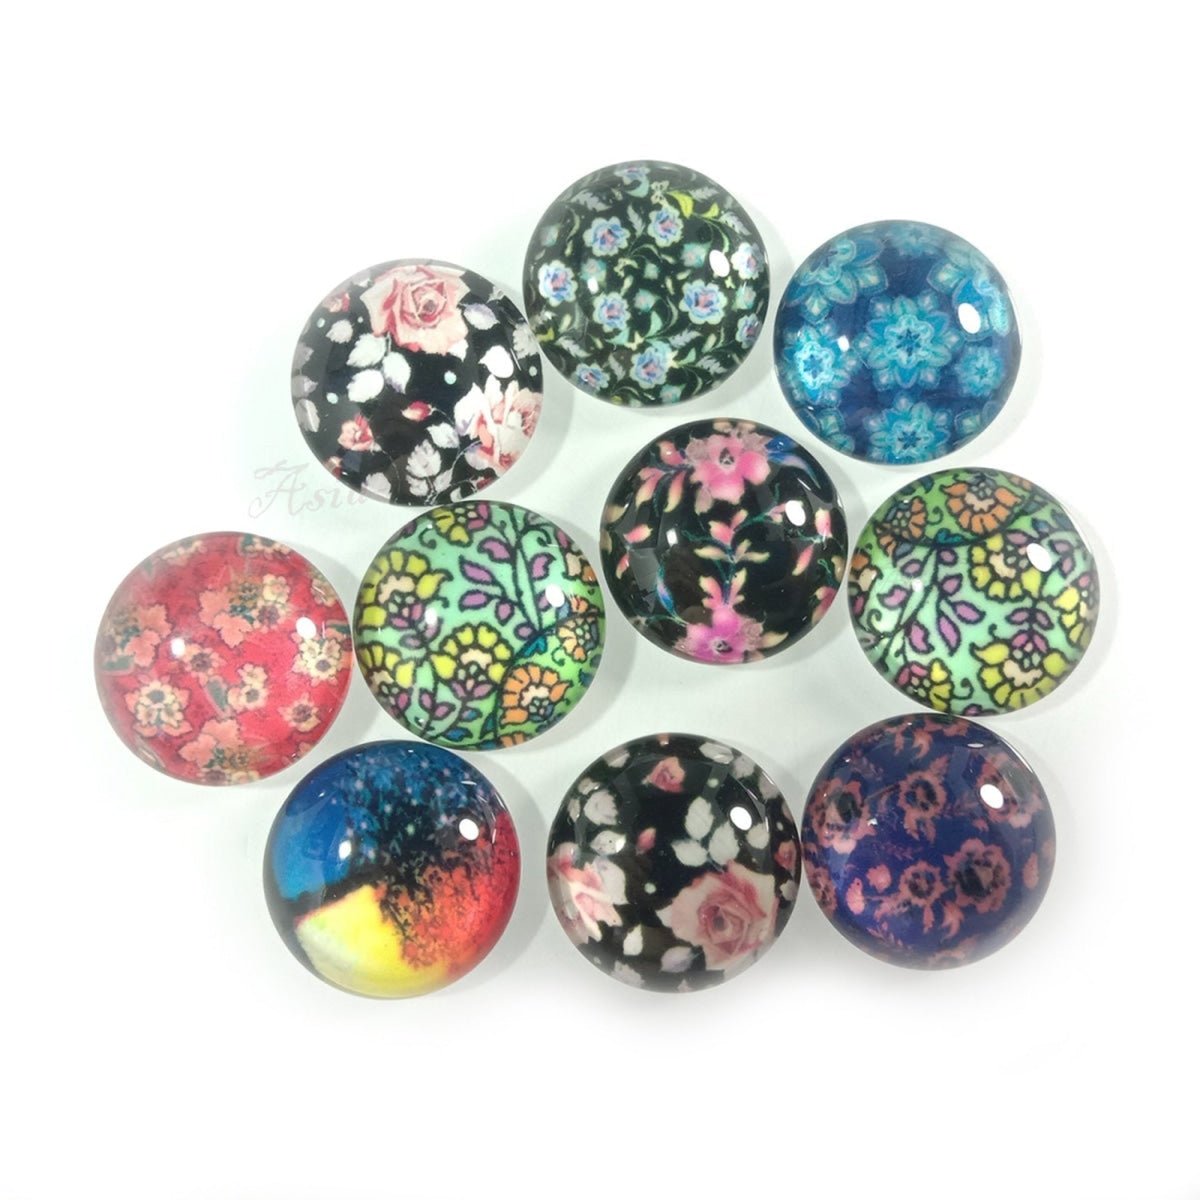 10pcs 20mm Mixed Round Flower Glass Cabochon for Bracelet Necklace Earrings Jewellery Crafts - Set 2 - - Asia Sell